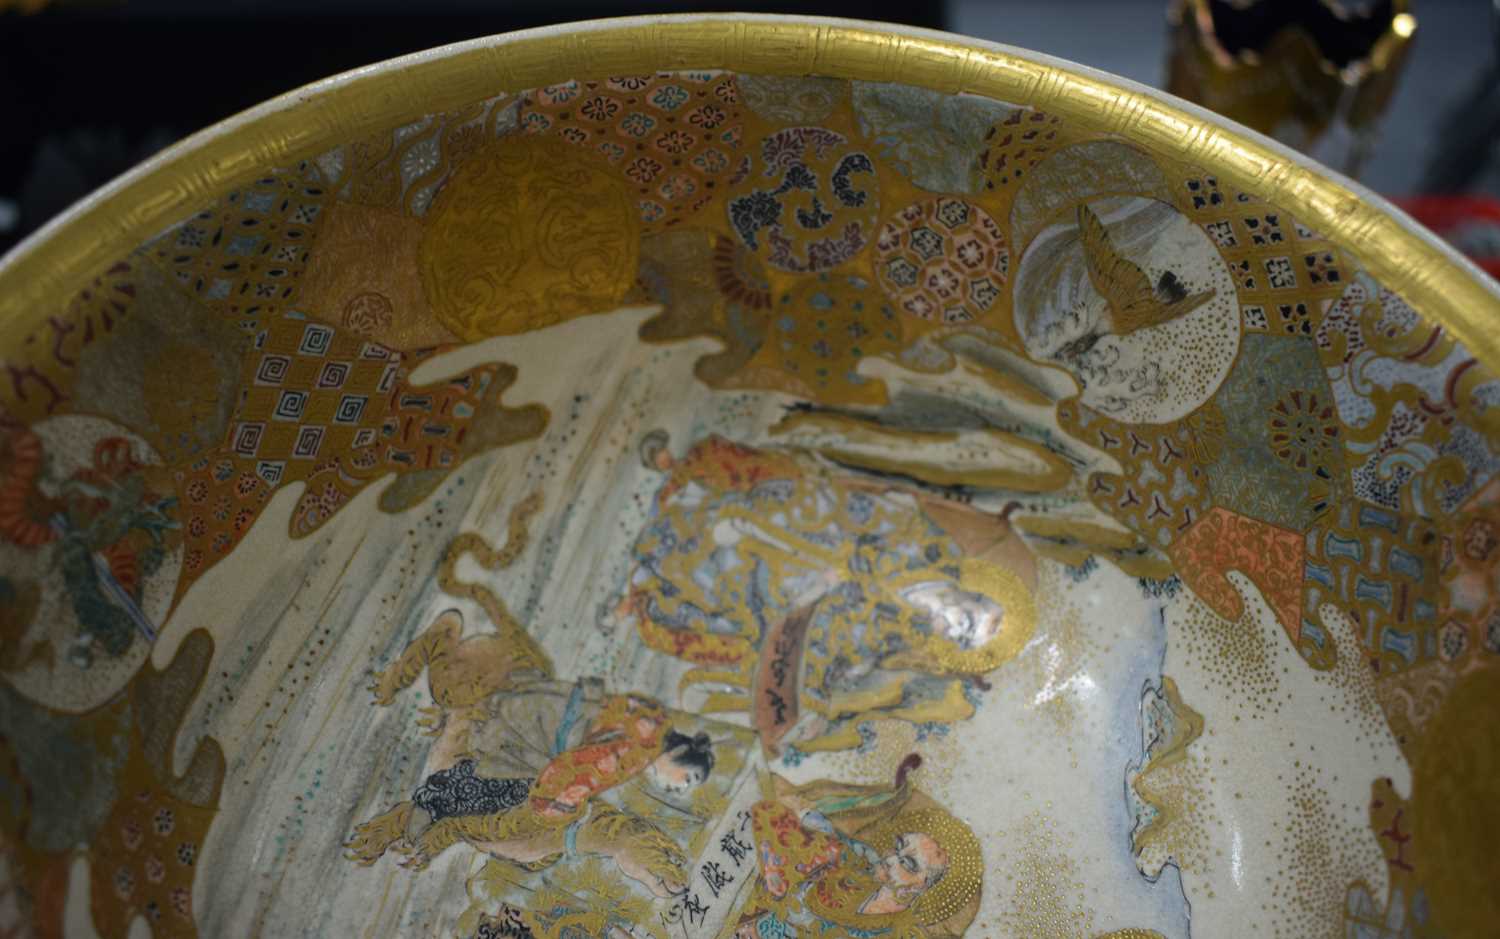 A LARGE 19TH CENTURY JAPANESE MEIJI PERIOD SATSUMA BOWL painted with immortals within landscapes, - Image 16 of 18